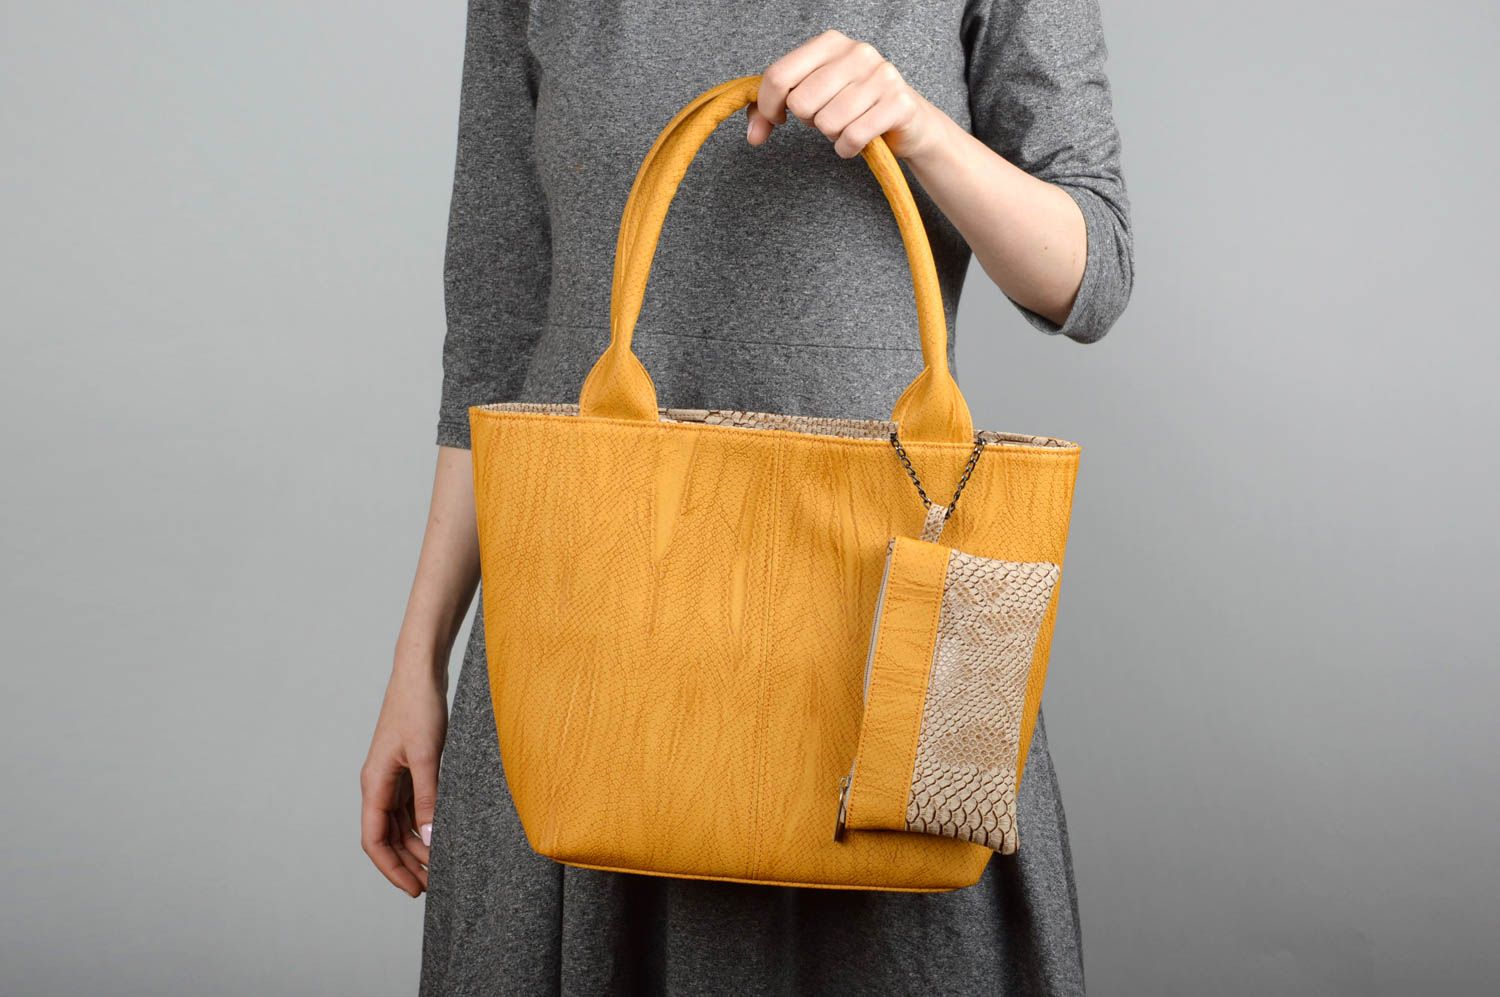 Handmade leatherette bag with purse yellow bag business style bag bag for women photo 1